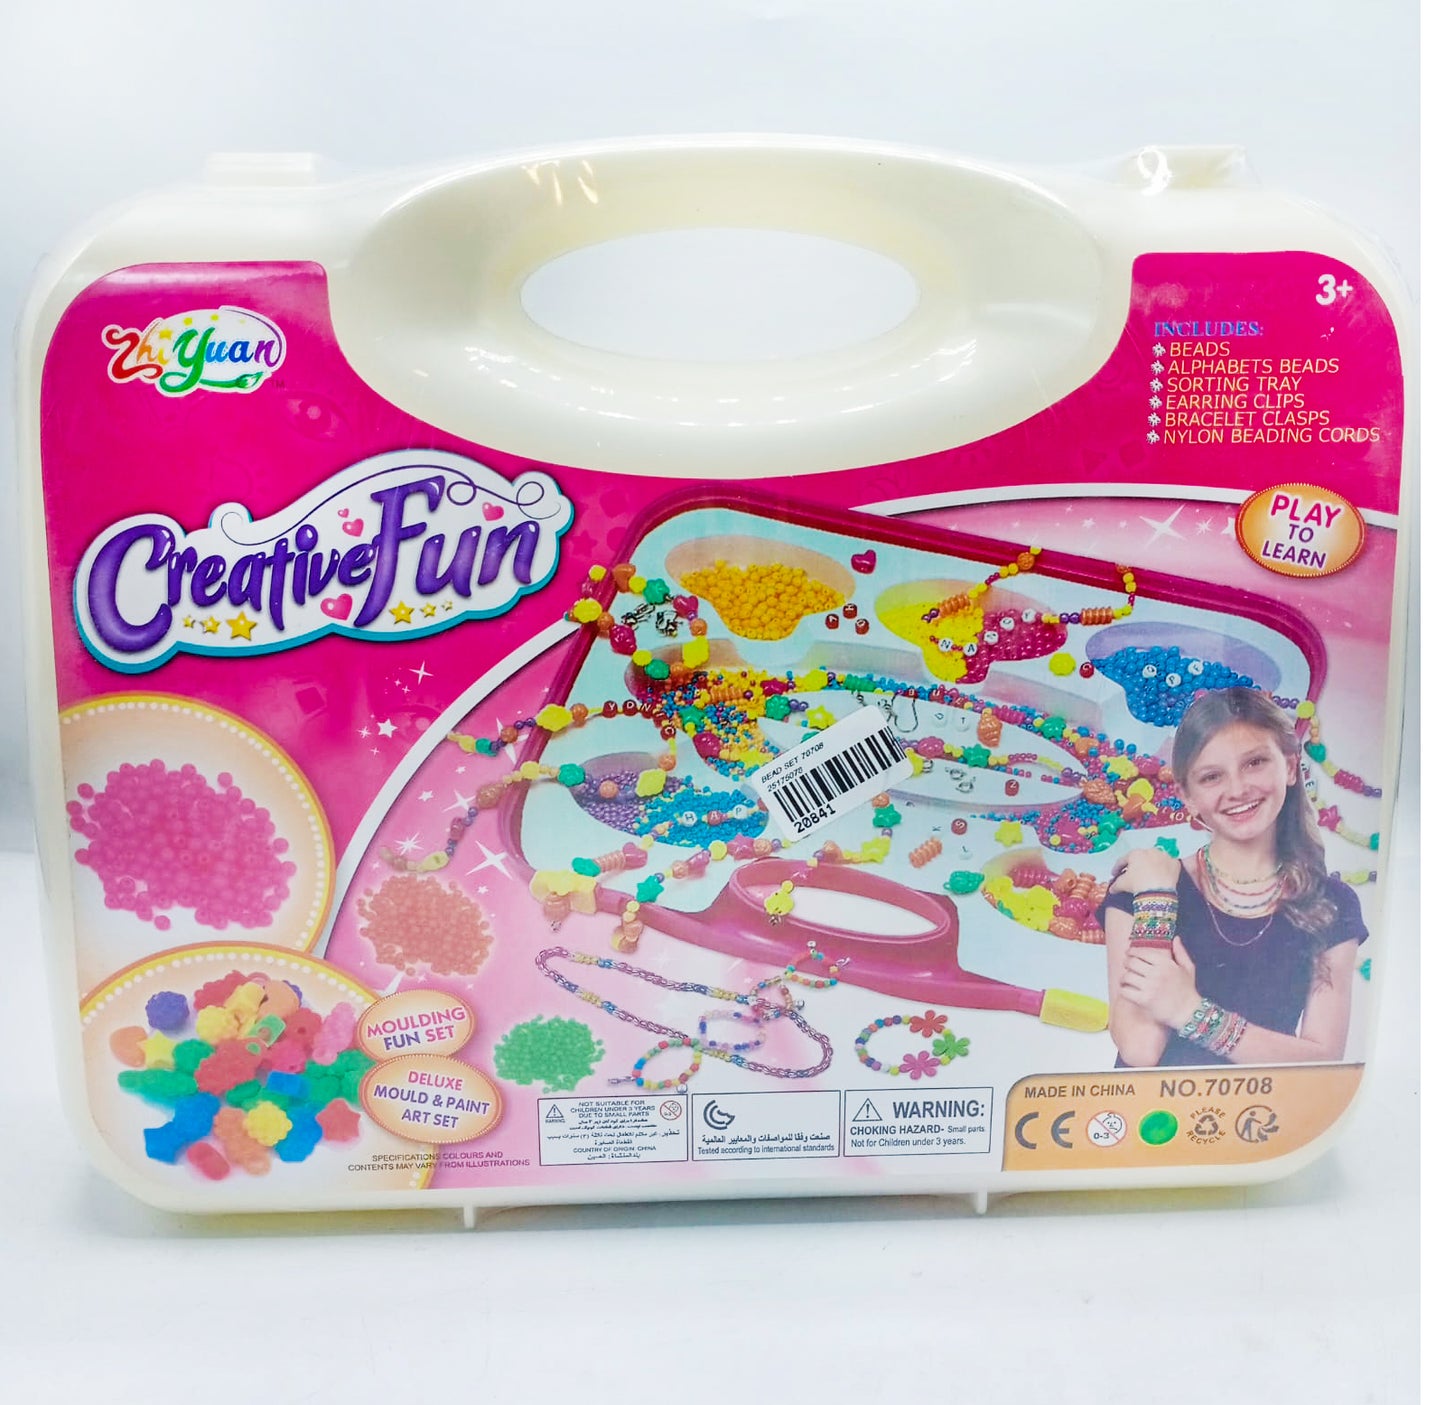 Girls Hand Bead Set, Deluxe Mould and Paint Art Set, Moulding Fun Set